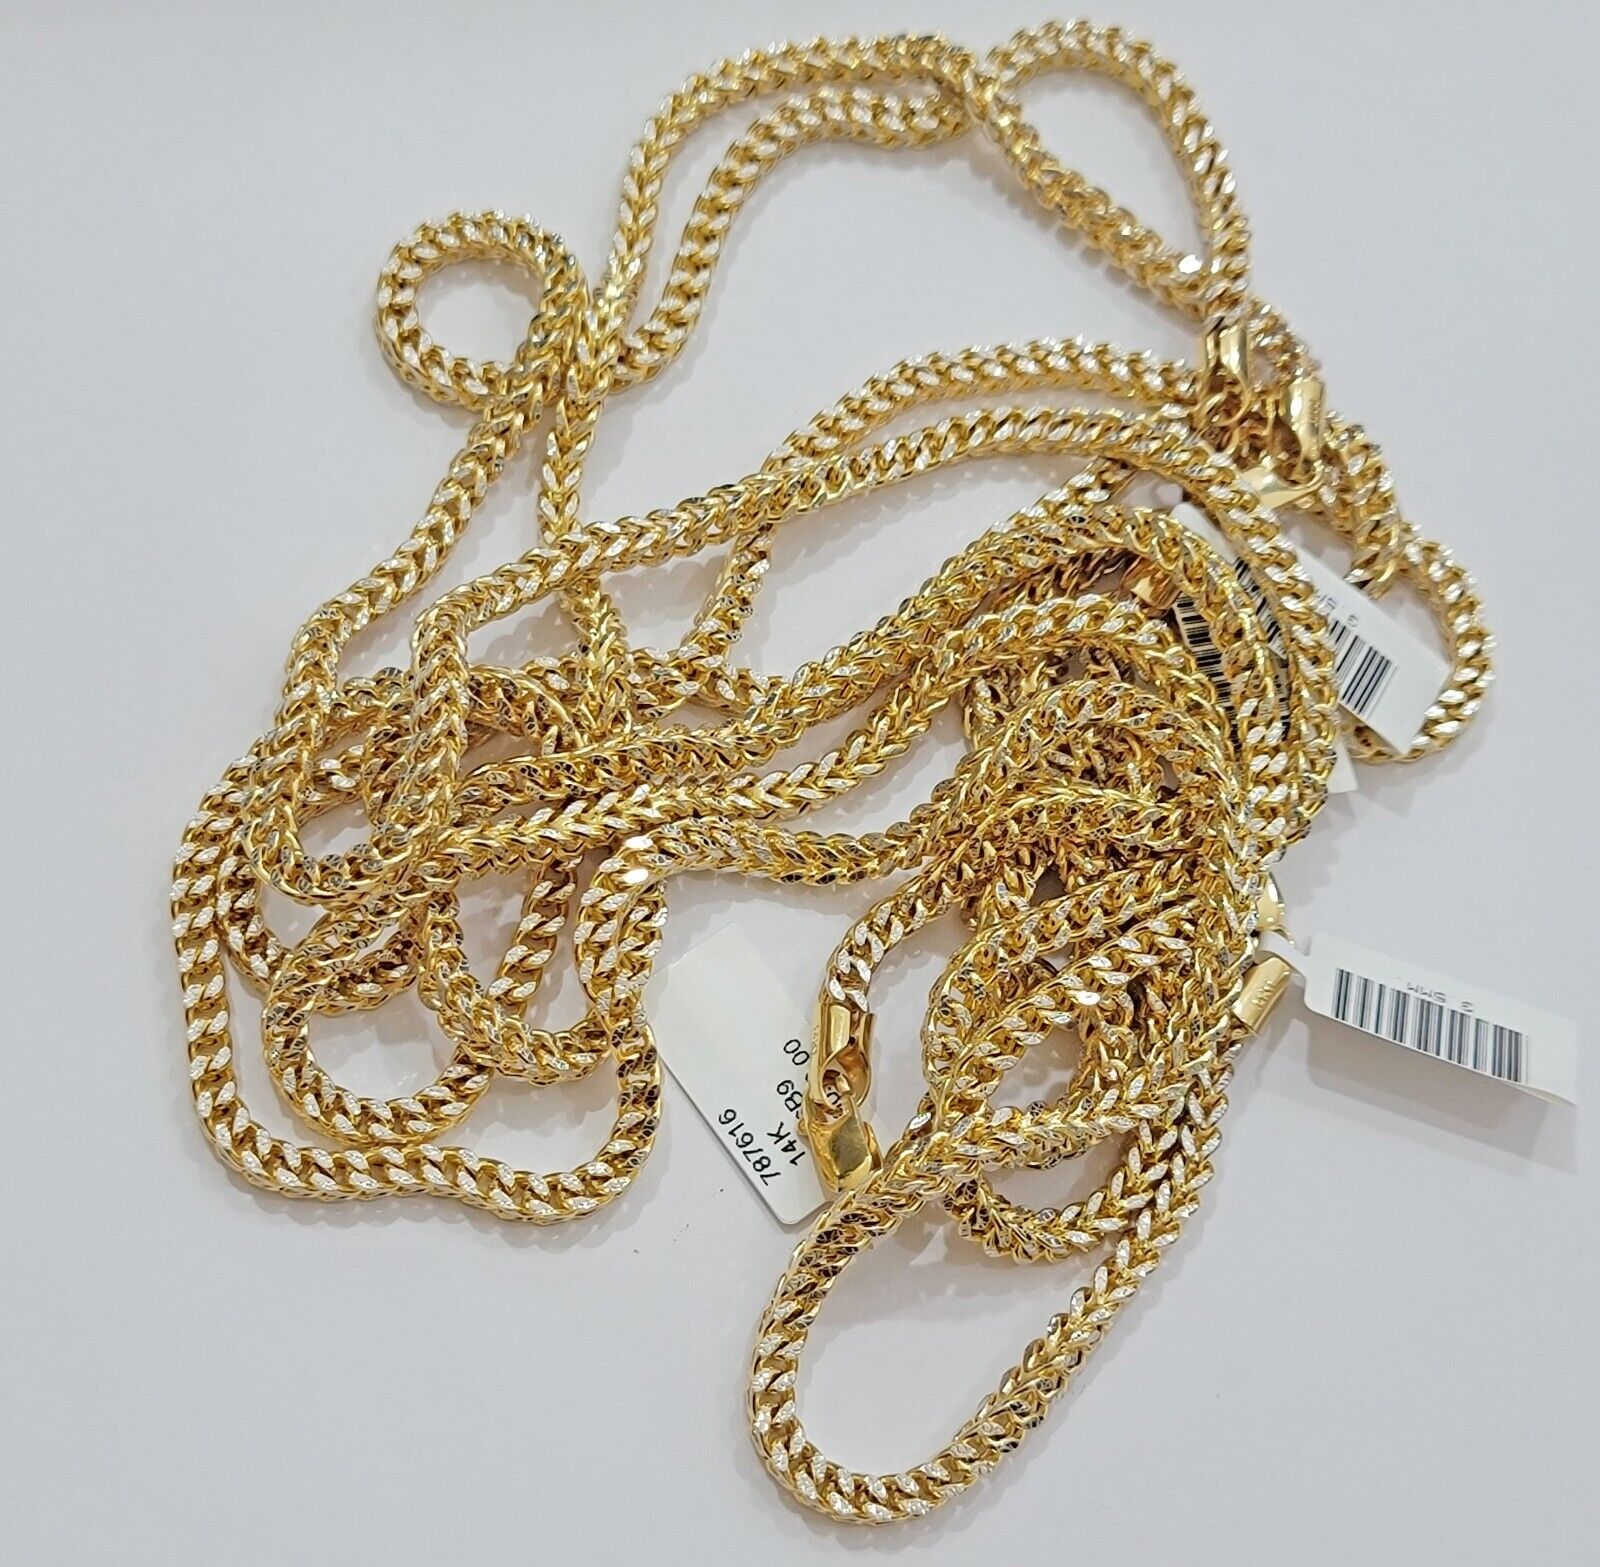 Real 14k Gold Franco Chain Mens Necklace 24" 3.5mm Diamond cuts 14kt Yellow Gold